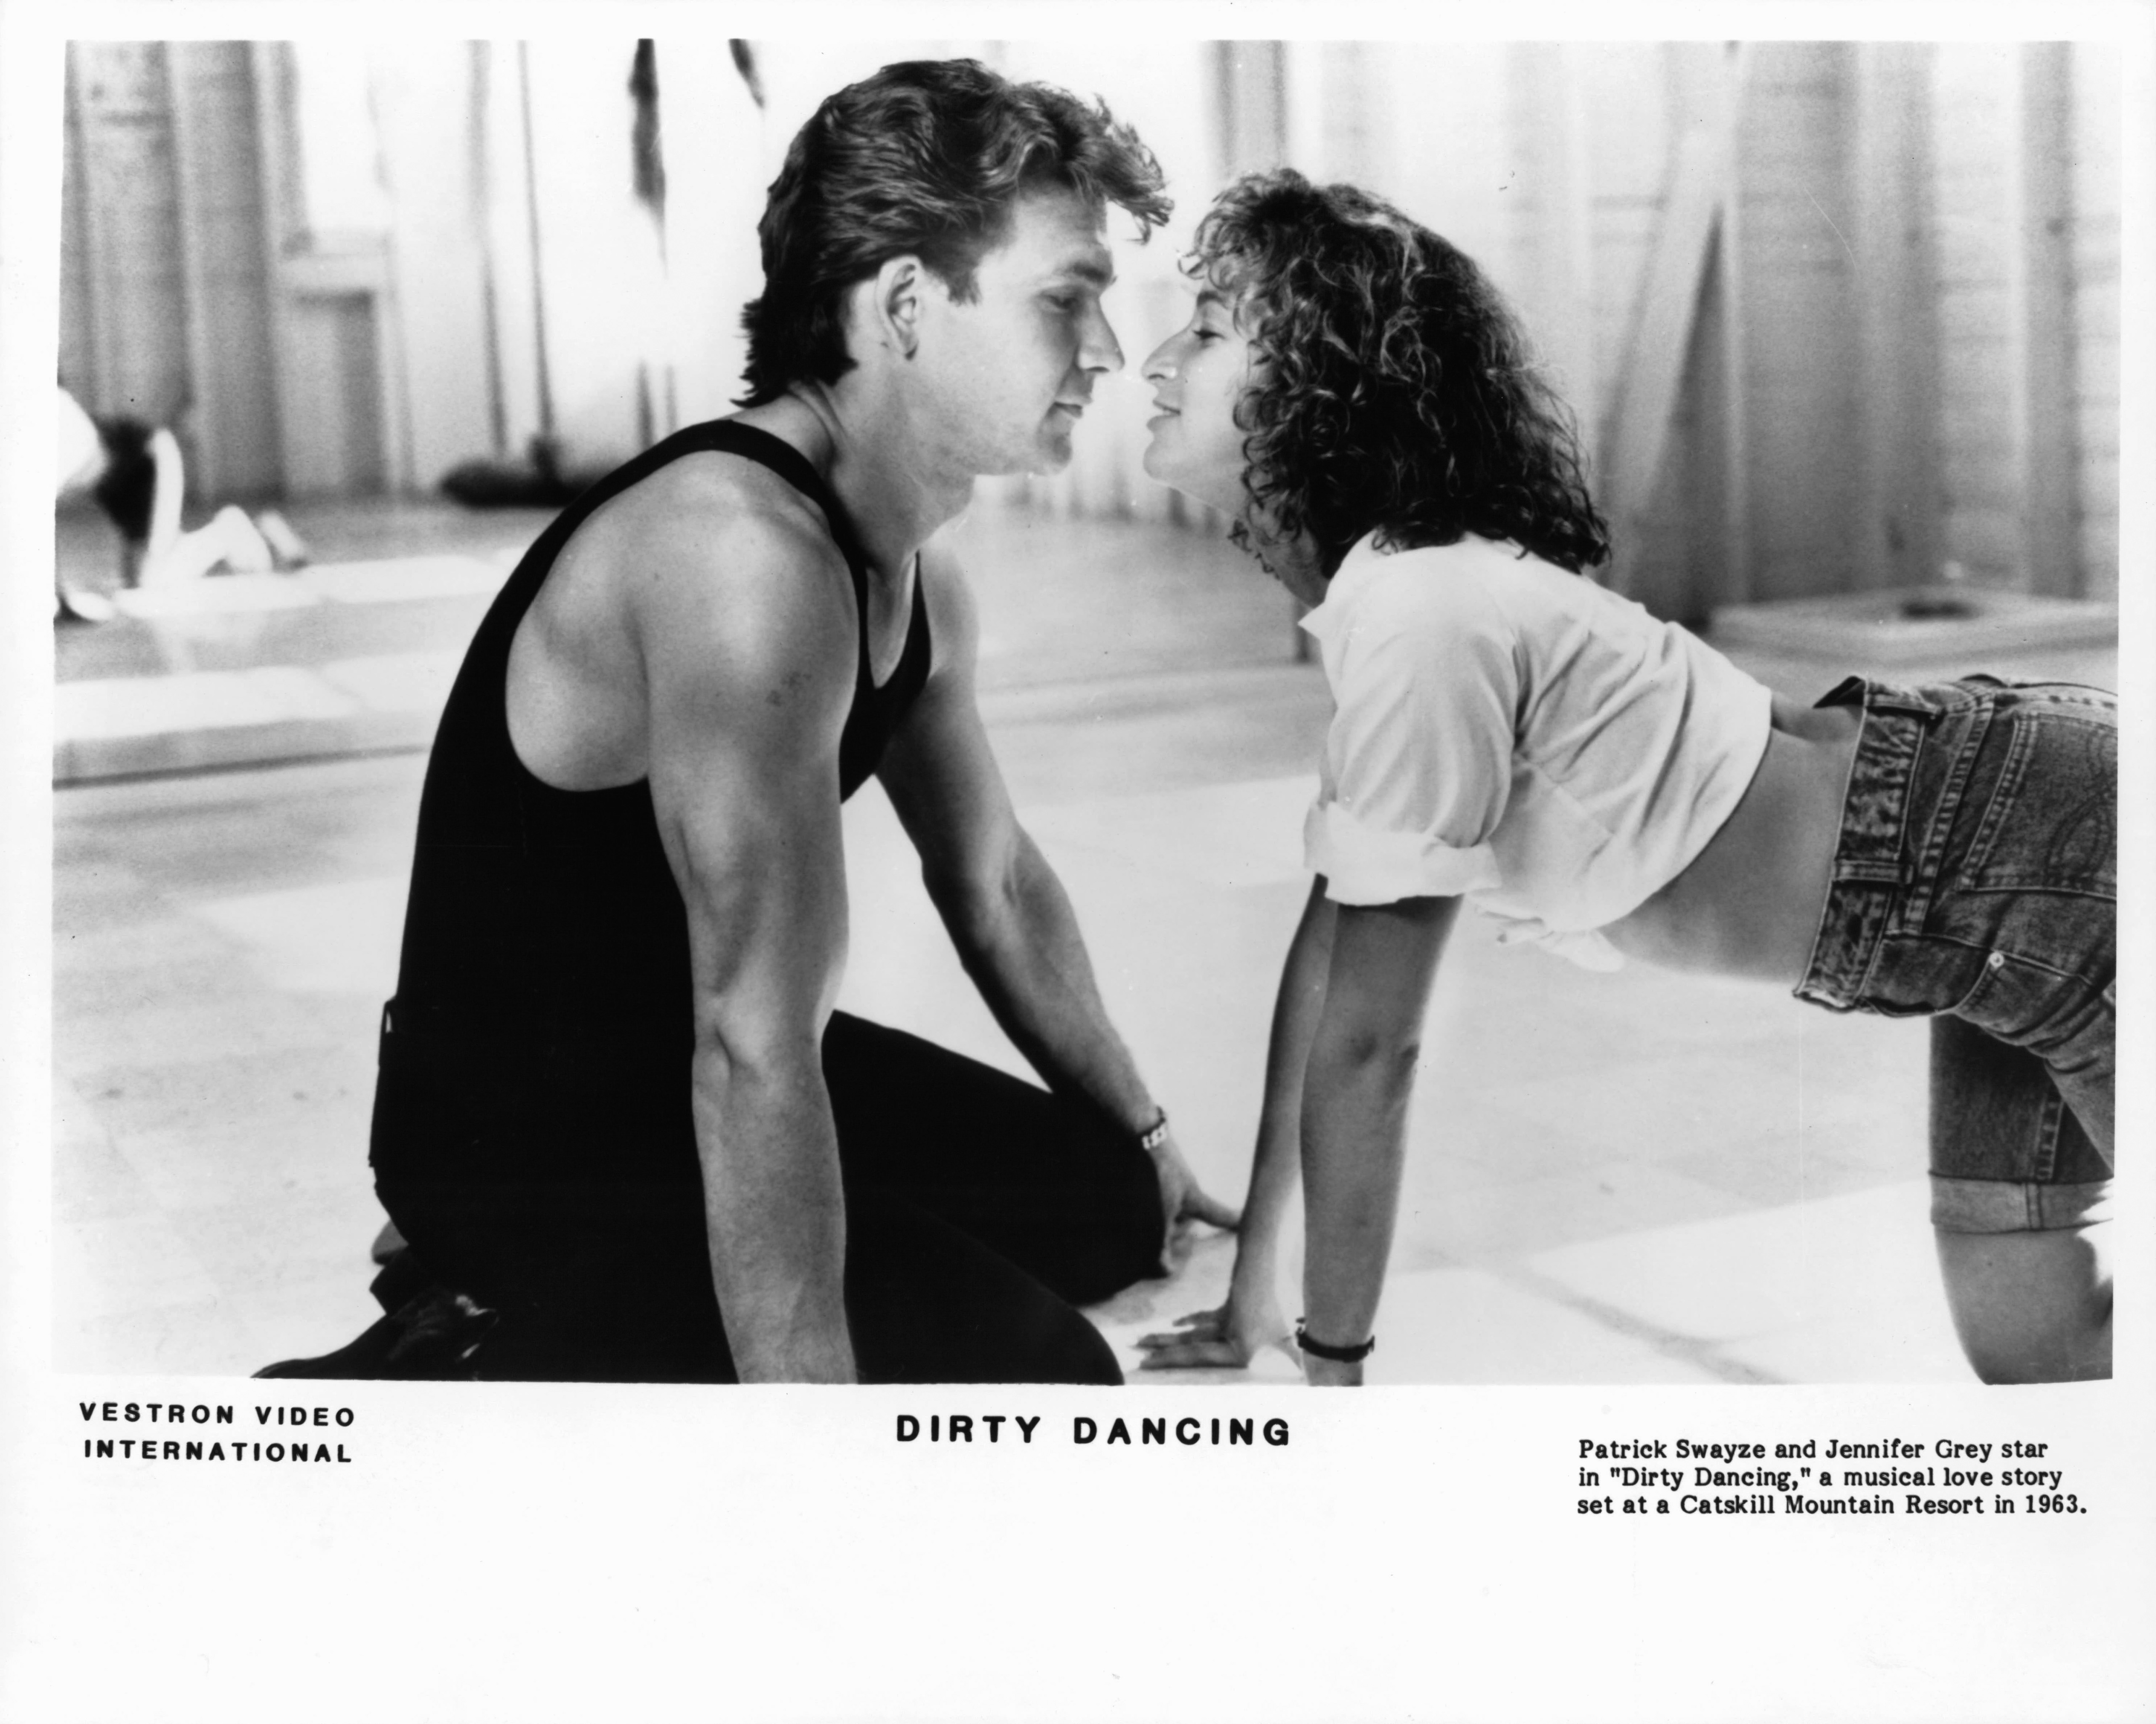 Patrick Swayze (1952 - 2009) and Jennifer Grey in a scene from the film "Dirty Dancing," on January 1, 1987. | Source: Getty Images